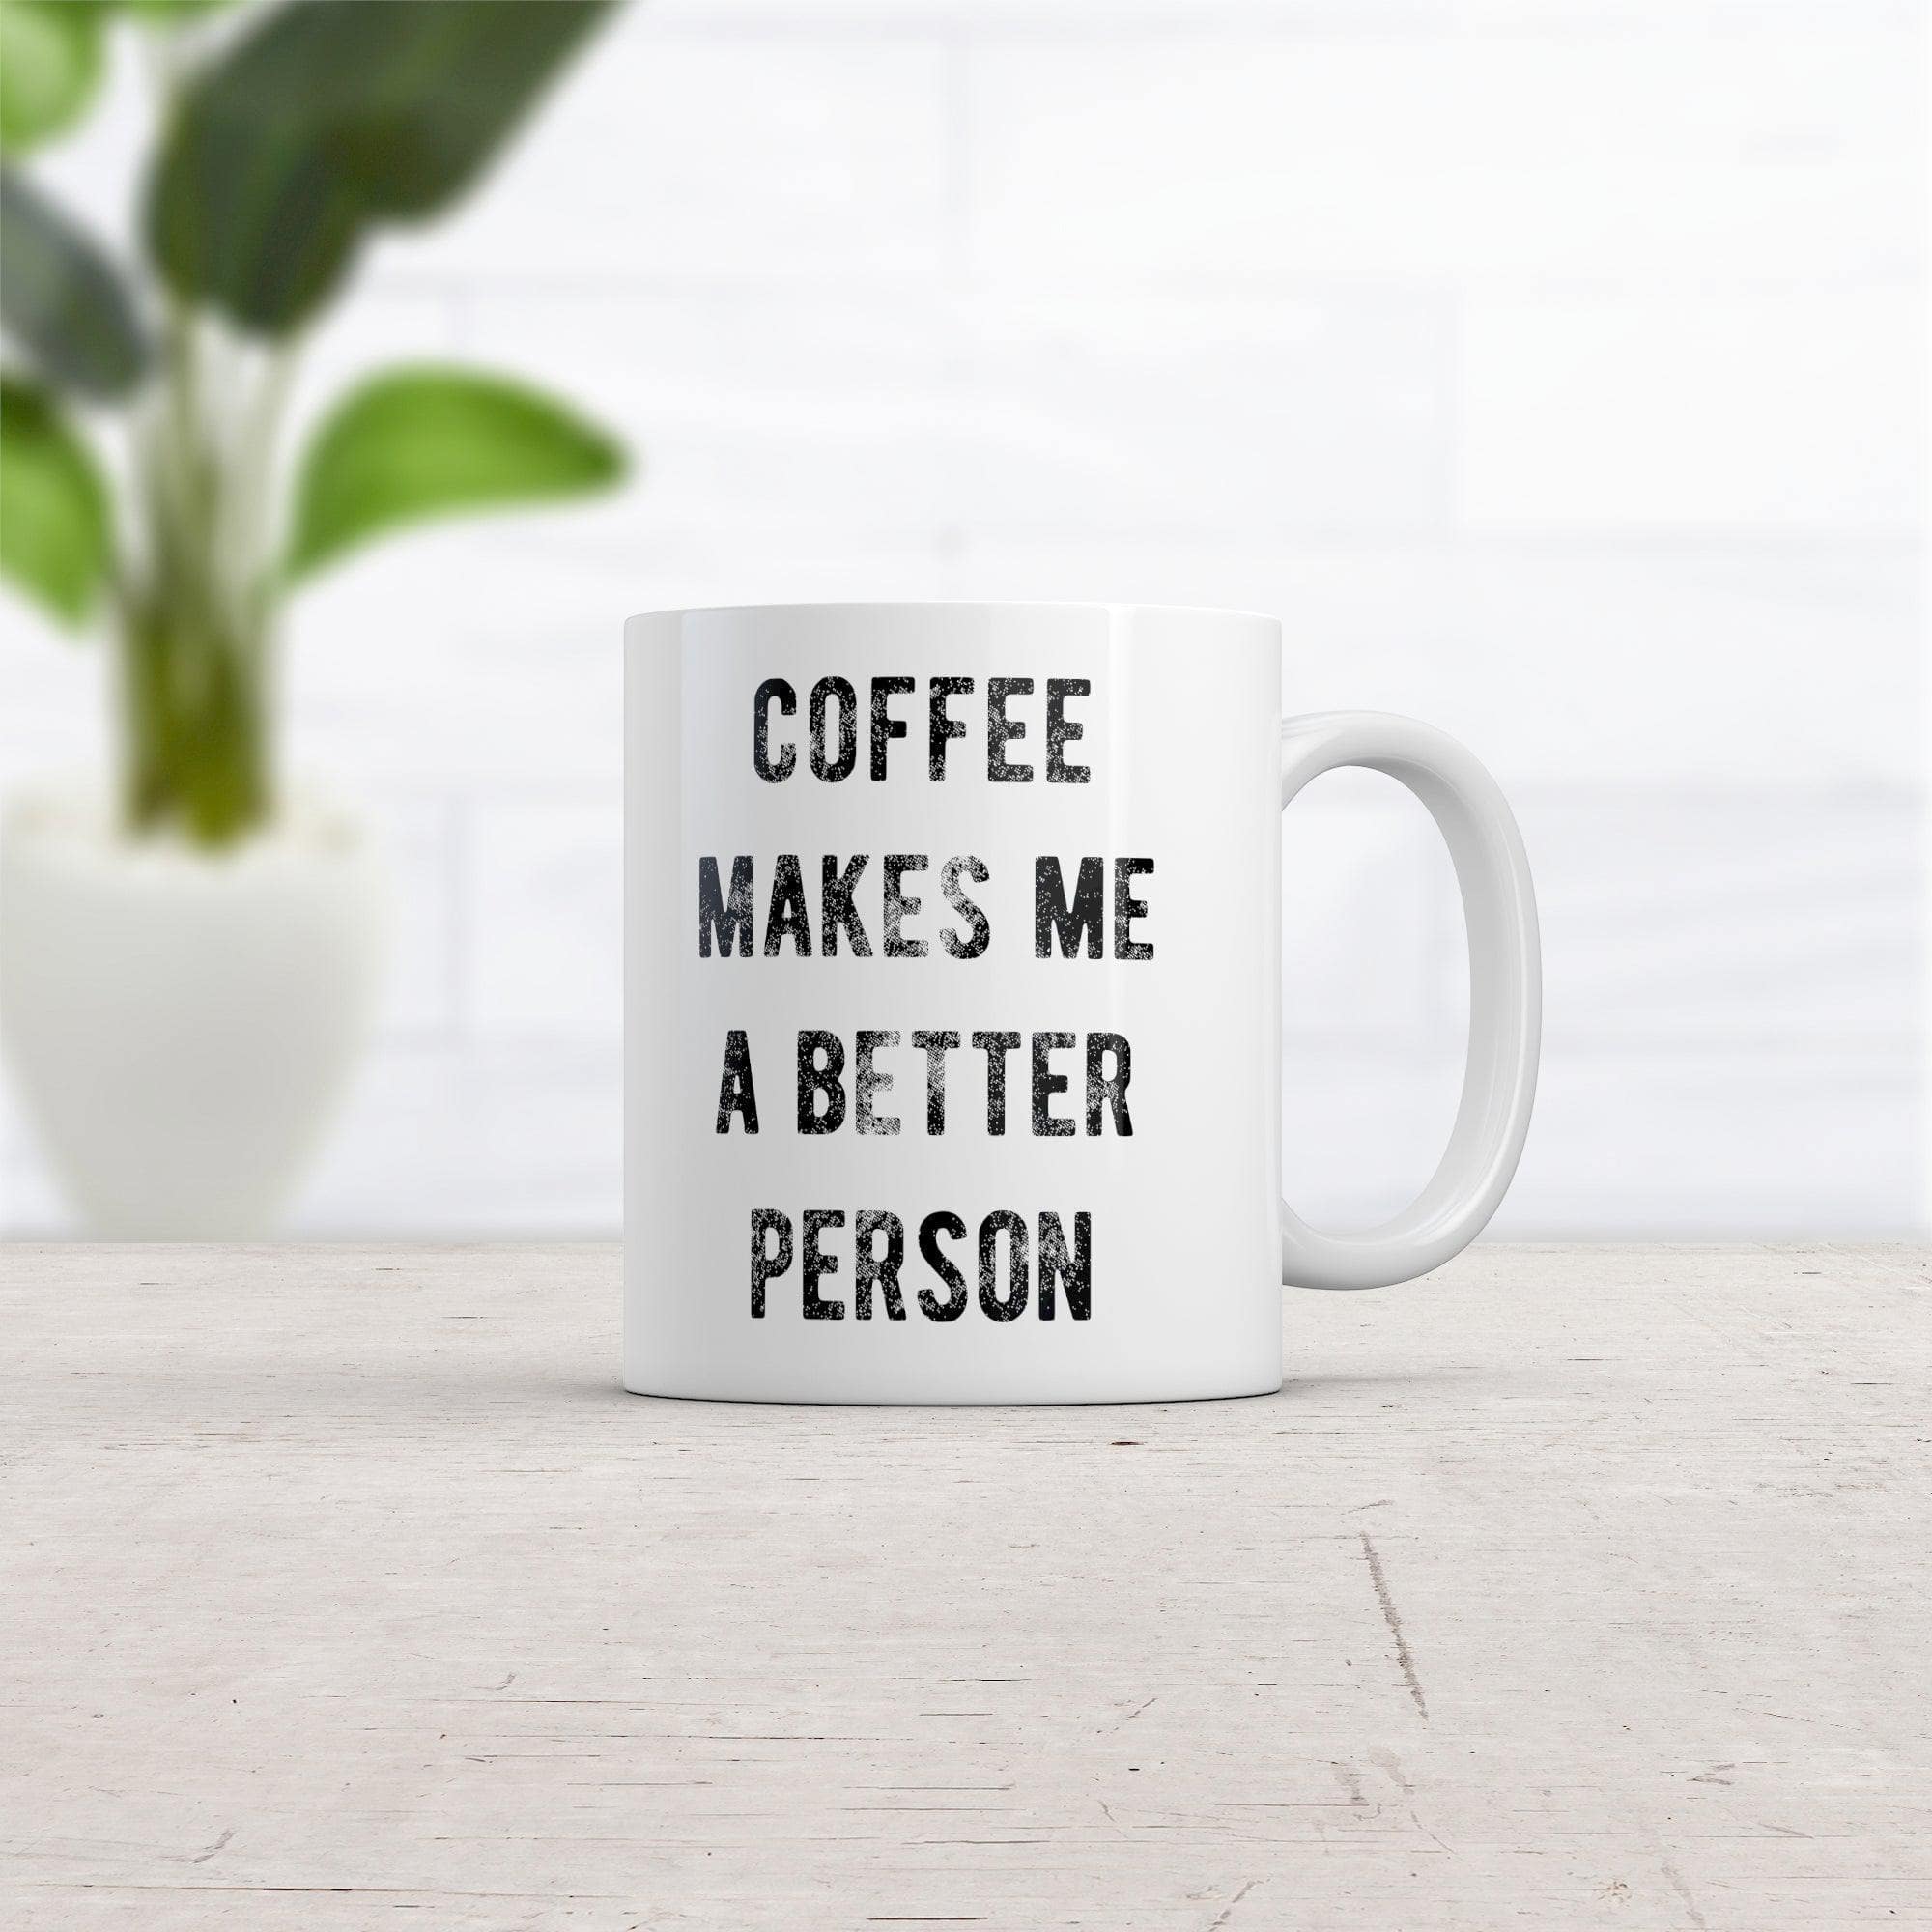 Coffee Makes Me A Better Person Mug Funny Sarcastic Caffeine Lovers Novelty Cup-11oz  -  Crazy Dog T-Shirts